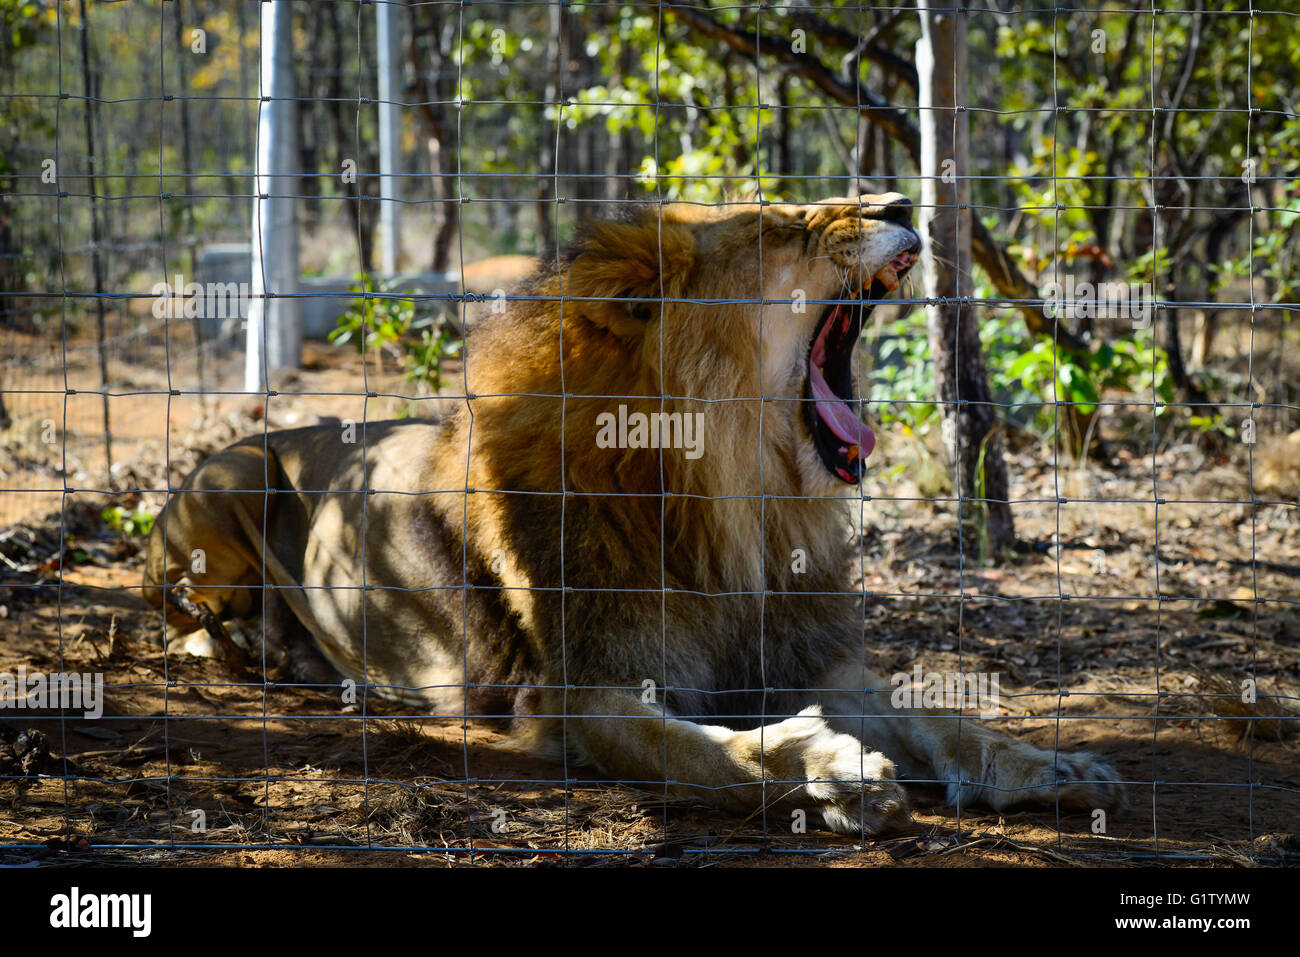 (160520) -- VAALWATER, May 20, 2016 (Xinhua) -- Photo taken on May 19, 2016 shows one of the 33 former circus lions, whose claws have been removed by its previous owner, at the Emoya Big Cat Sanctuary, Vaalwater, South Africa's northern Limpopo province. Three lions rescued by the Stichting Leeuw of Holland arrived at their new home, the Emoya Big Cat Sanctuary on Thursday. Emoya means 'Welcome home' in Swazi language. The Sanctuary, with an area of 5,000 hectares, is currently home to 44 big cats. Thirty-three of them were lions rescued from circuses across Peru and Colombia and arrived here  Stock Photo